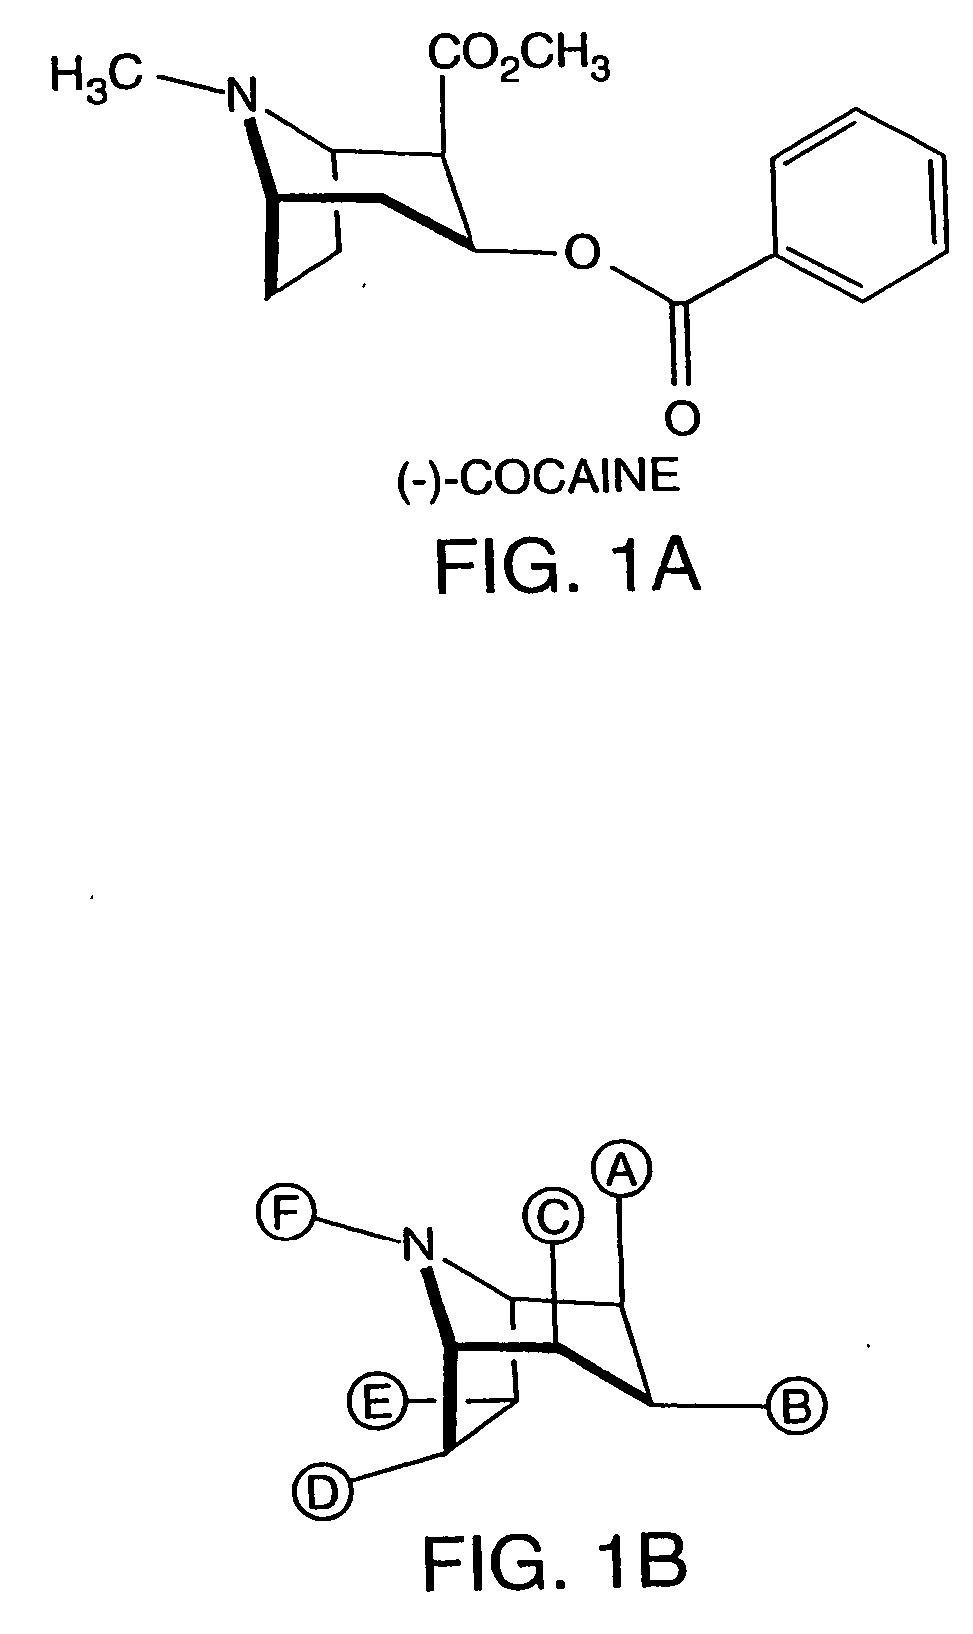 Hapten-carrier conjugates for use in drug-abuse therapy and methods for preparation of same